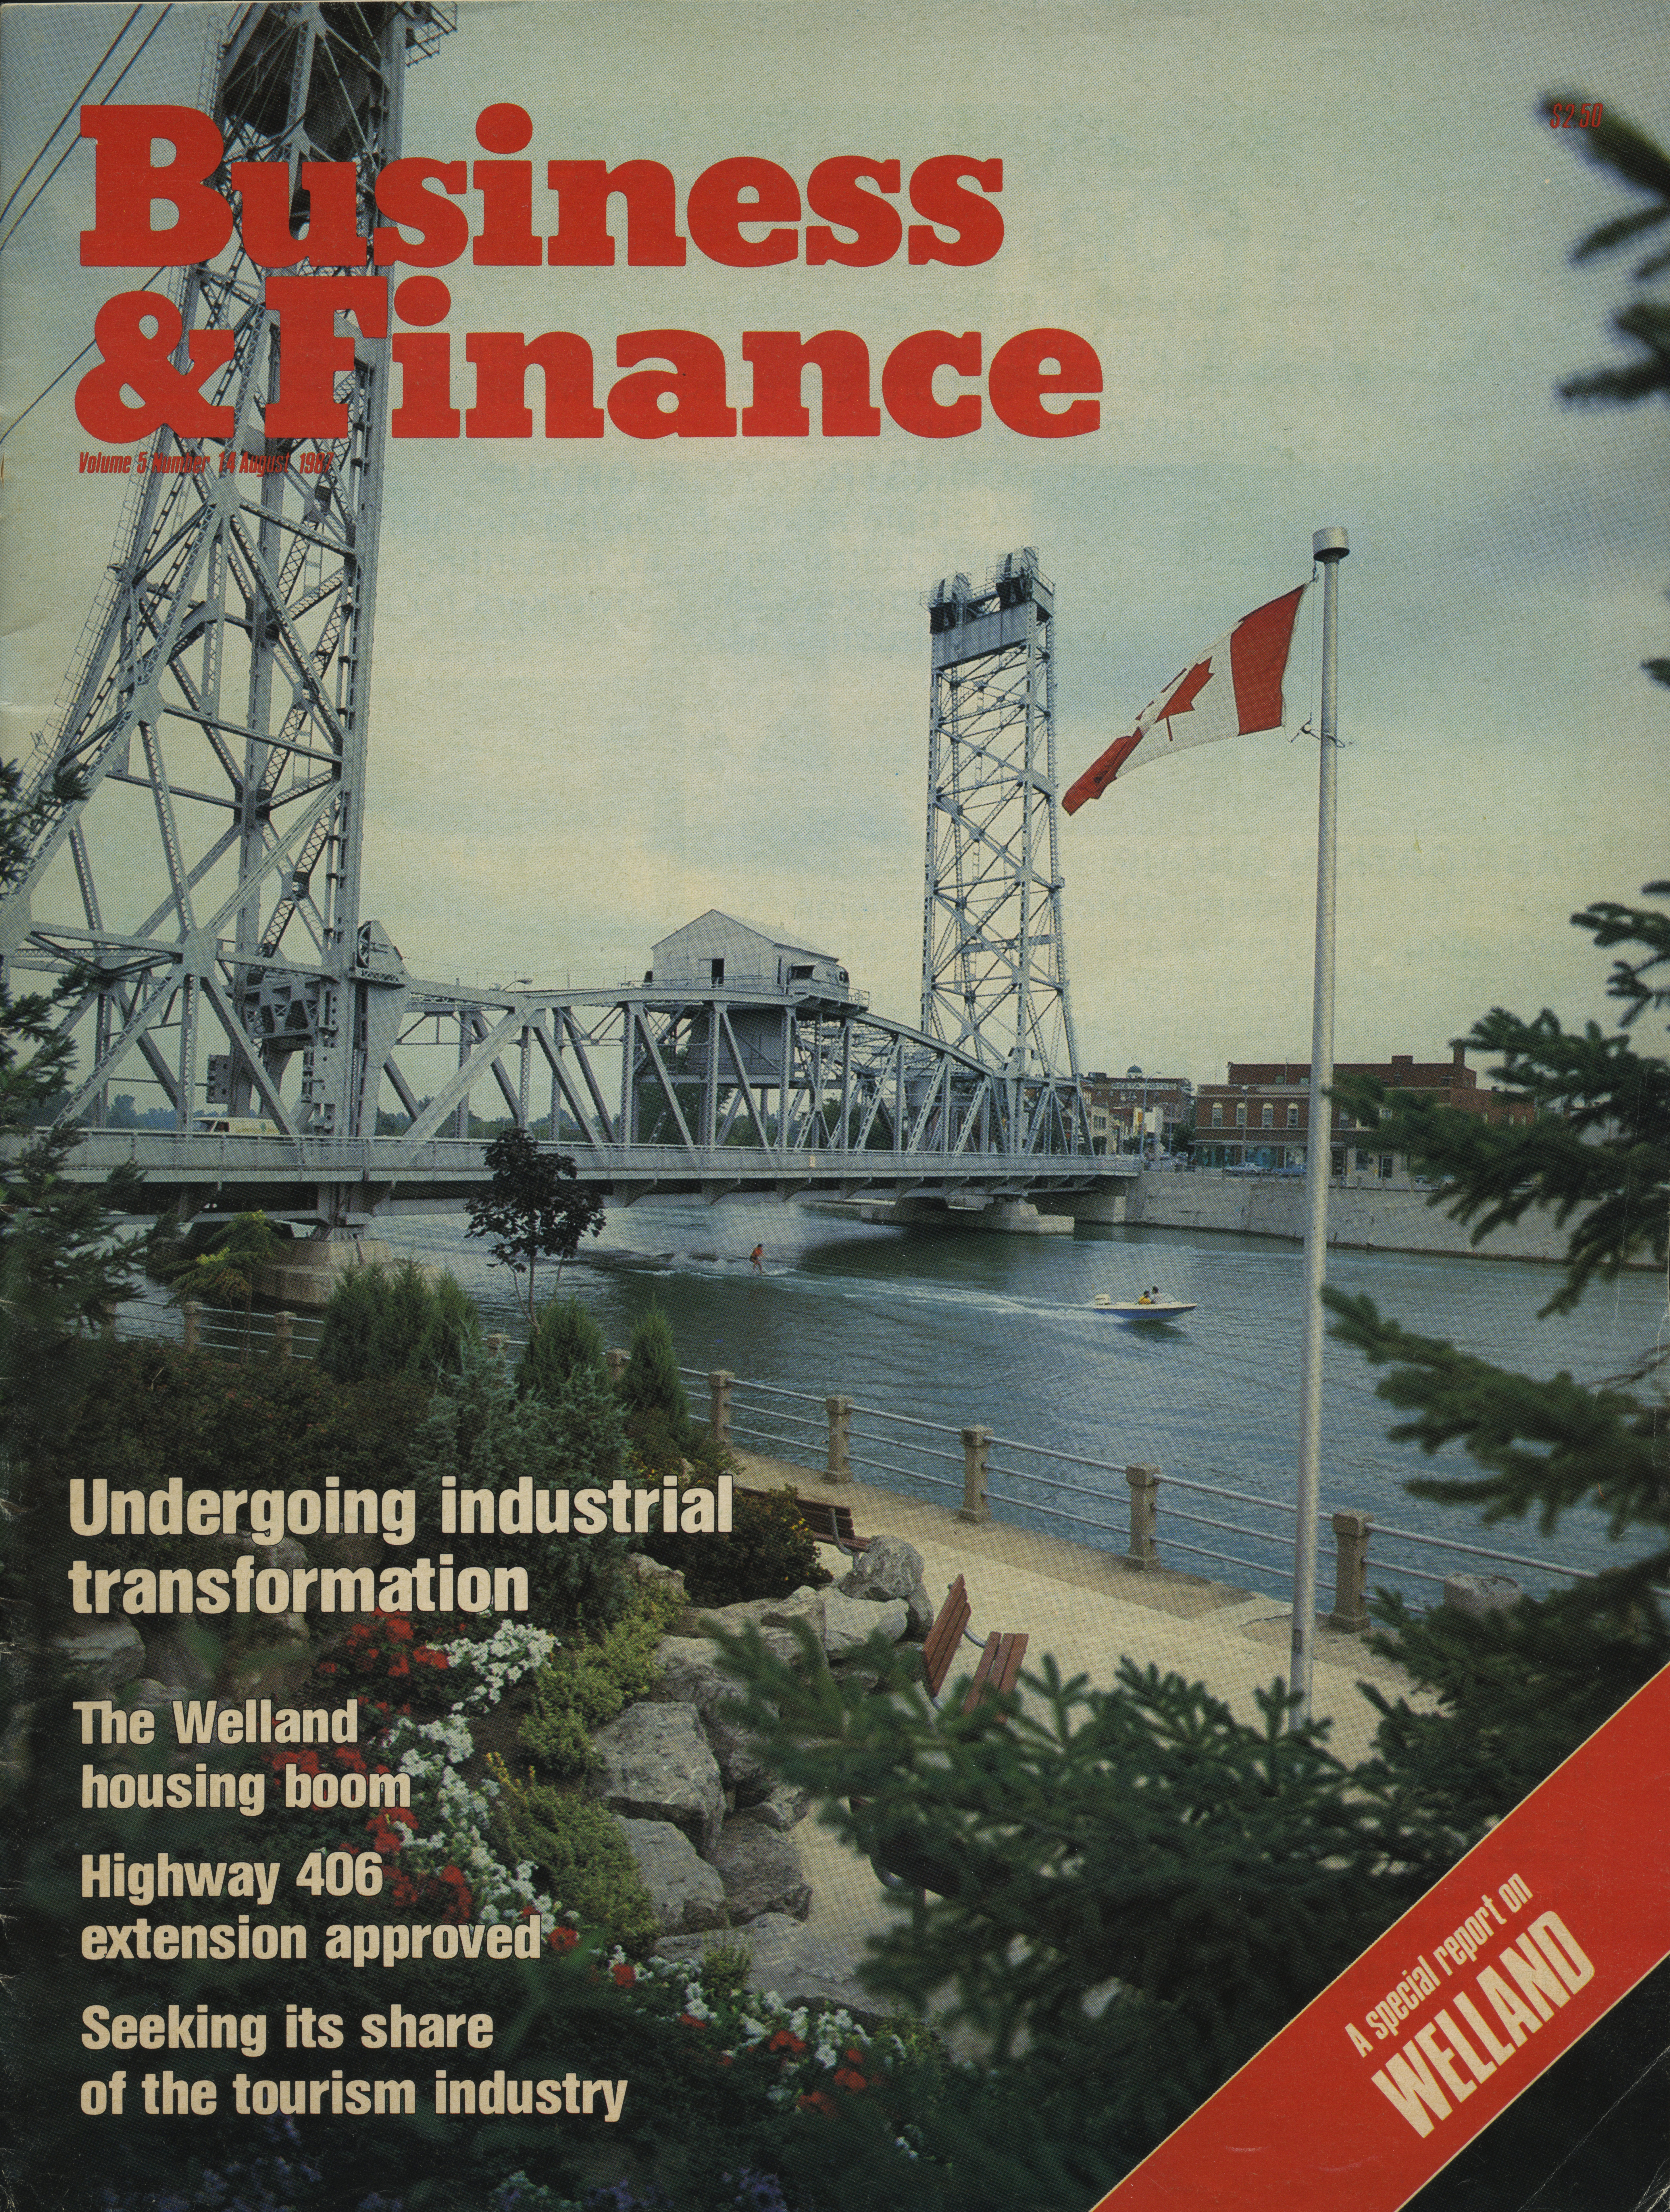 The title page of a magazine showing a colour photograph of a bridge over the canal, and a Canadian flag flying.